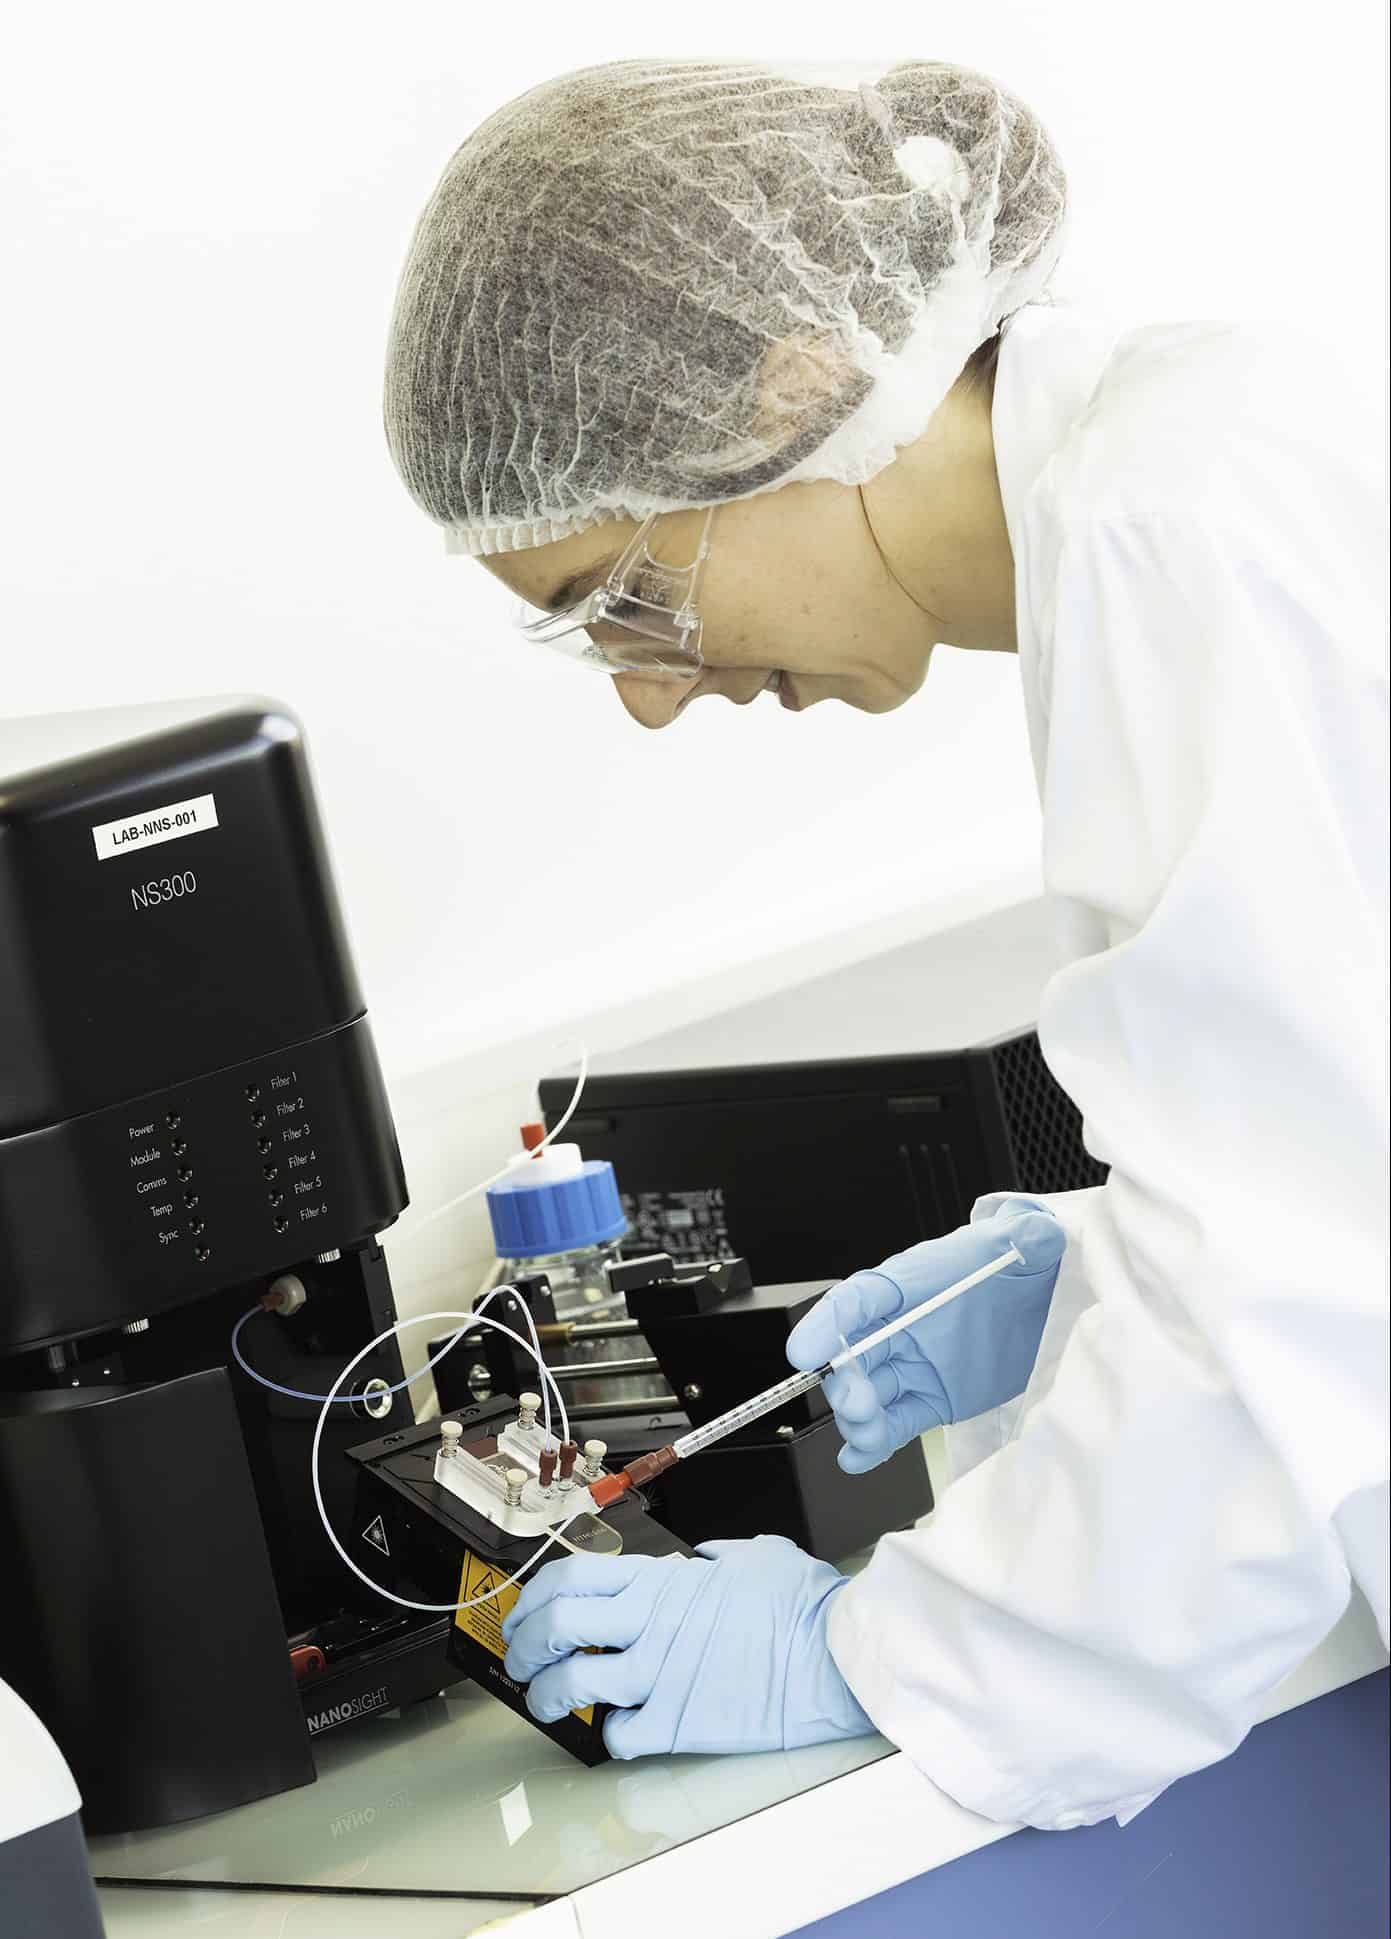 A complete development and manufacturing solution for your biopharmaceuticals